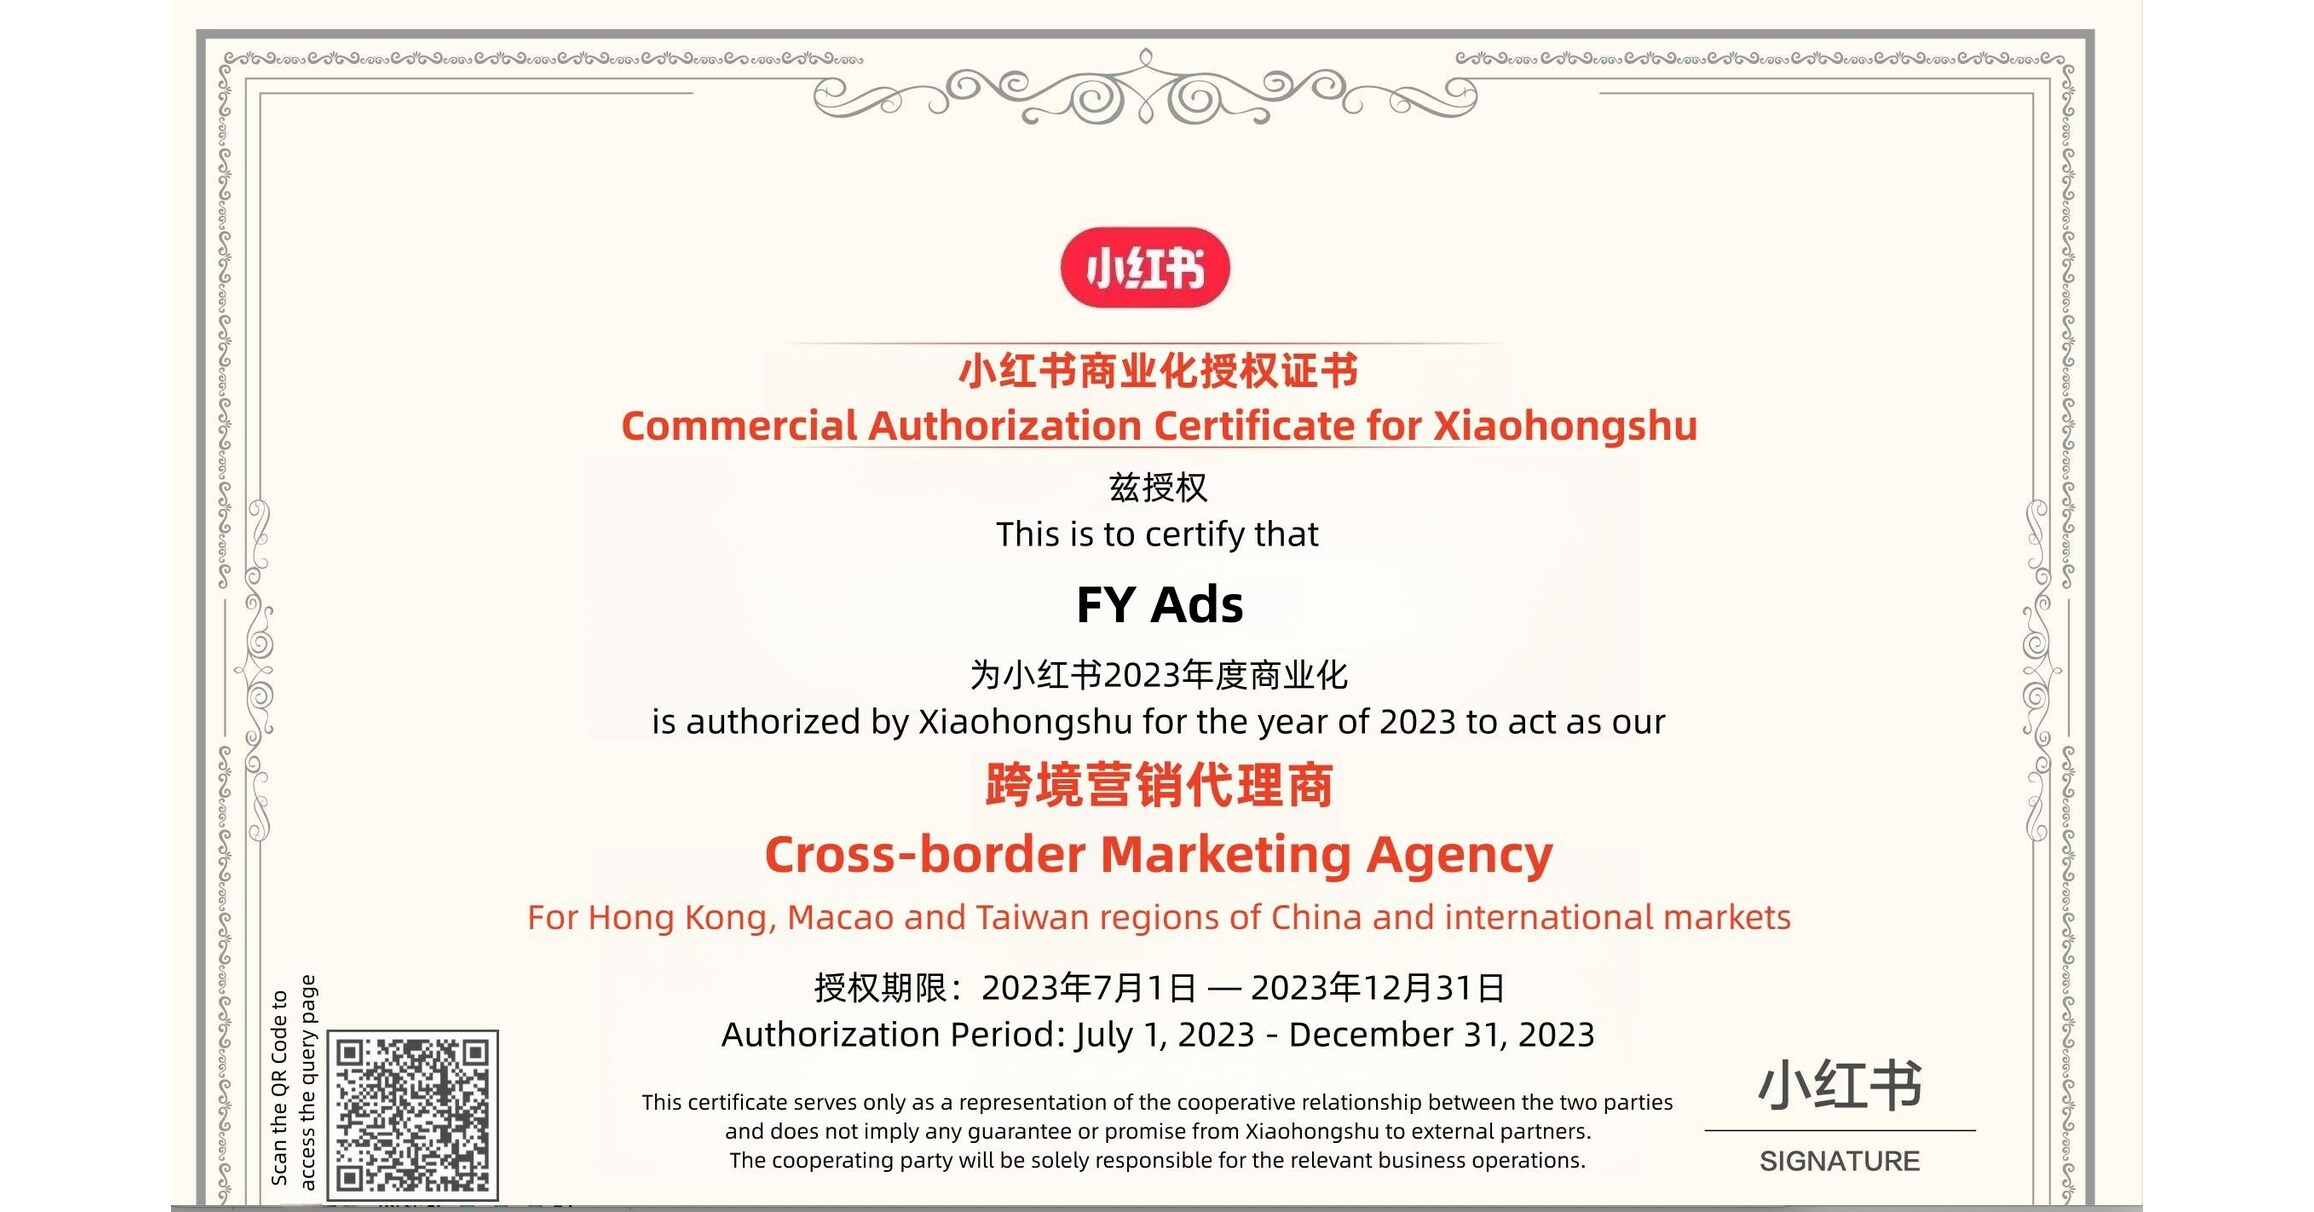 Pioneering as the First Overseas Official Xiaohongshu Authorized Cross-Border Marketing Agency